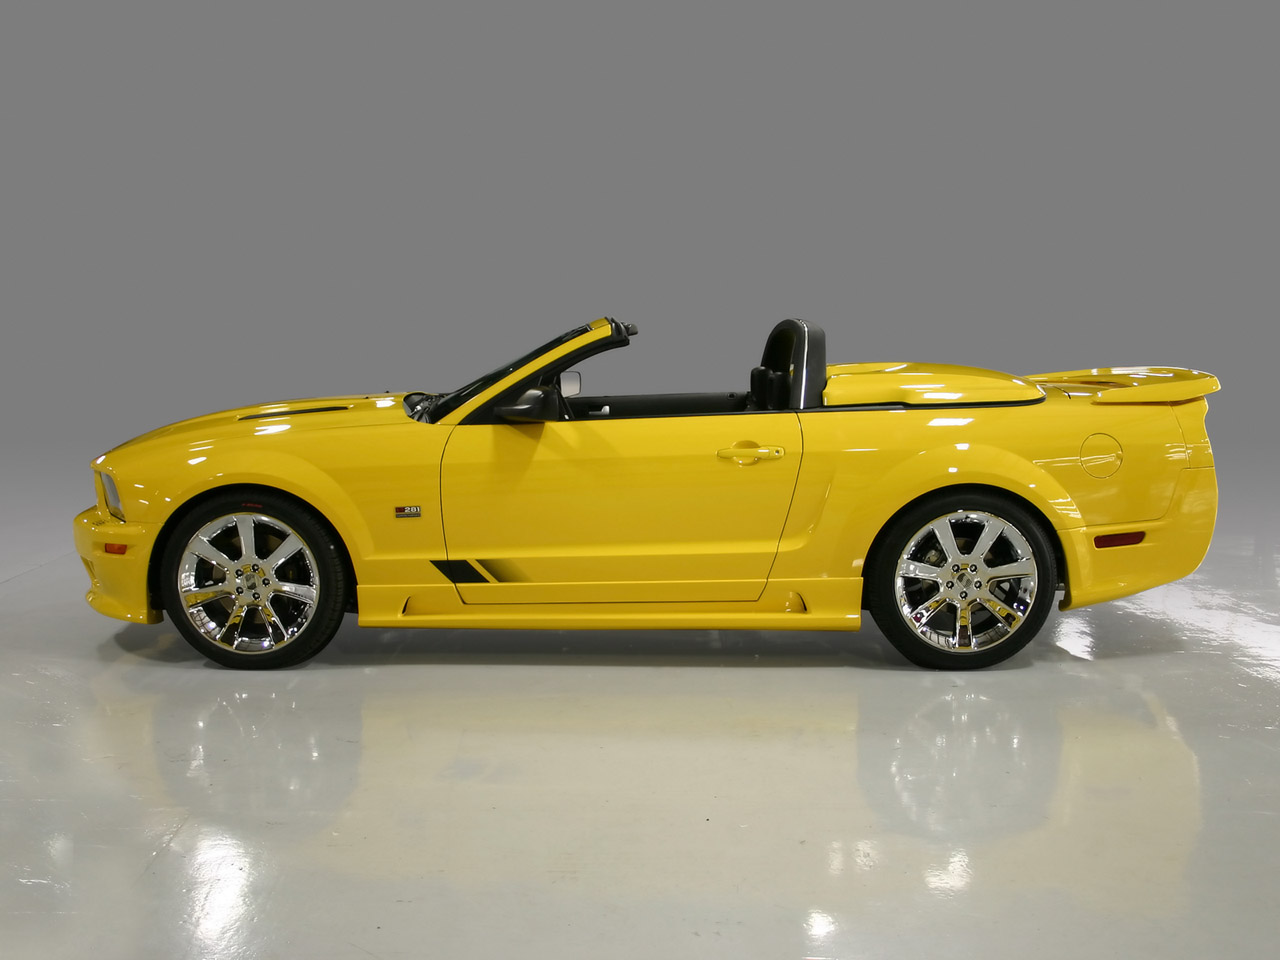 Saleen S281 Speedster Photo Gallery: Photo #06 out of 11, Image ...